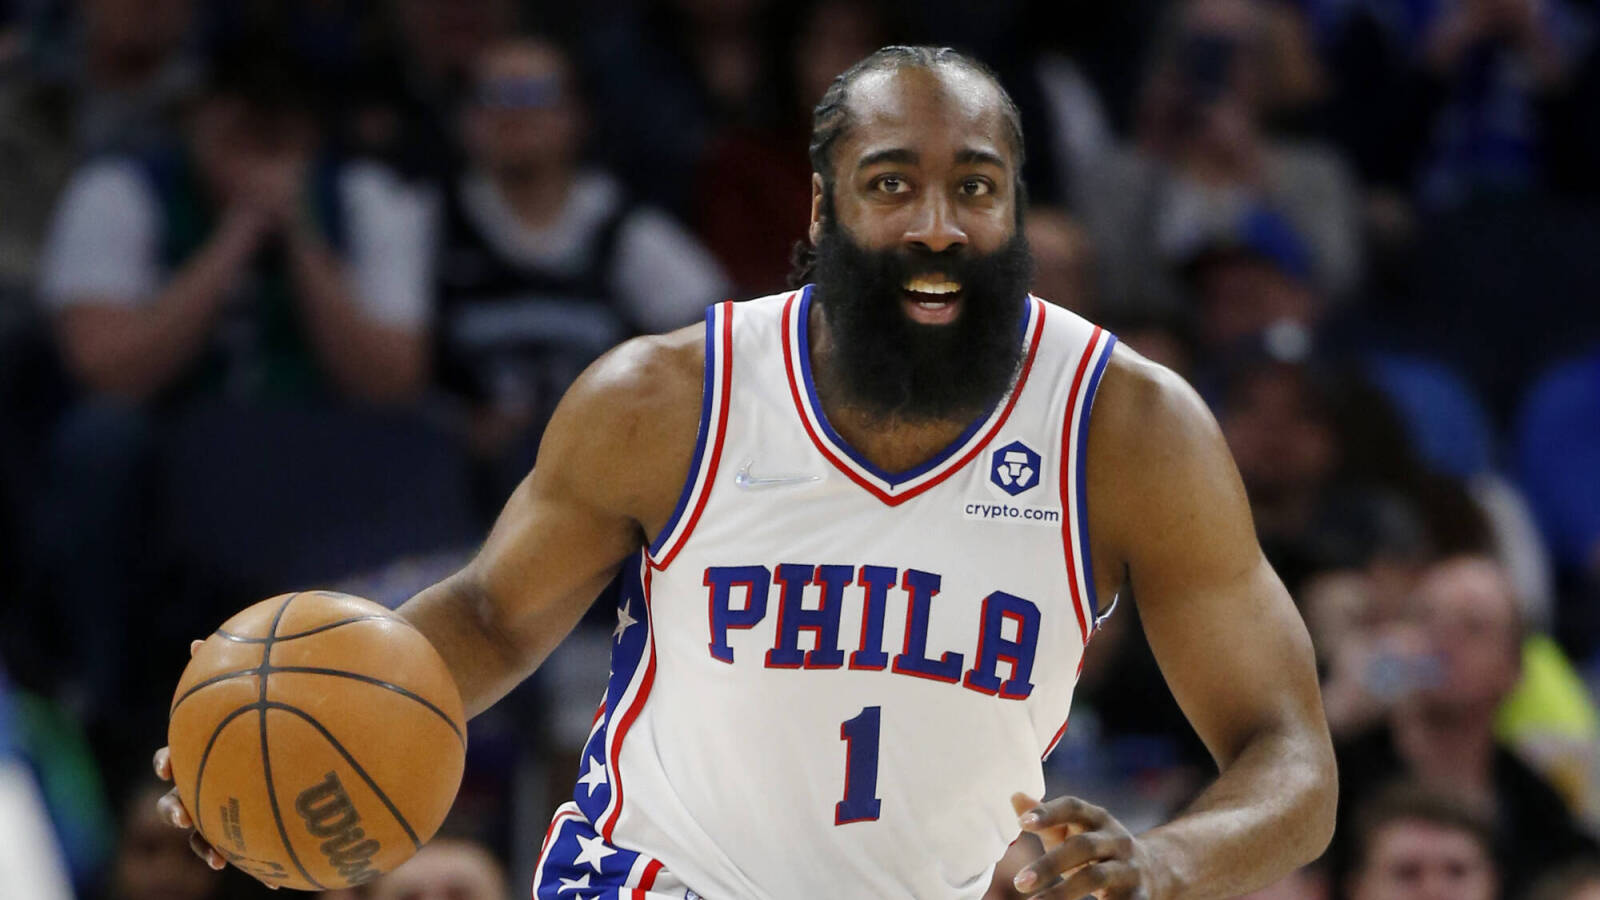 In debut with Sixers, James Harden leads Philly to blowout victory